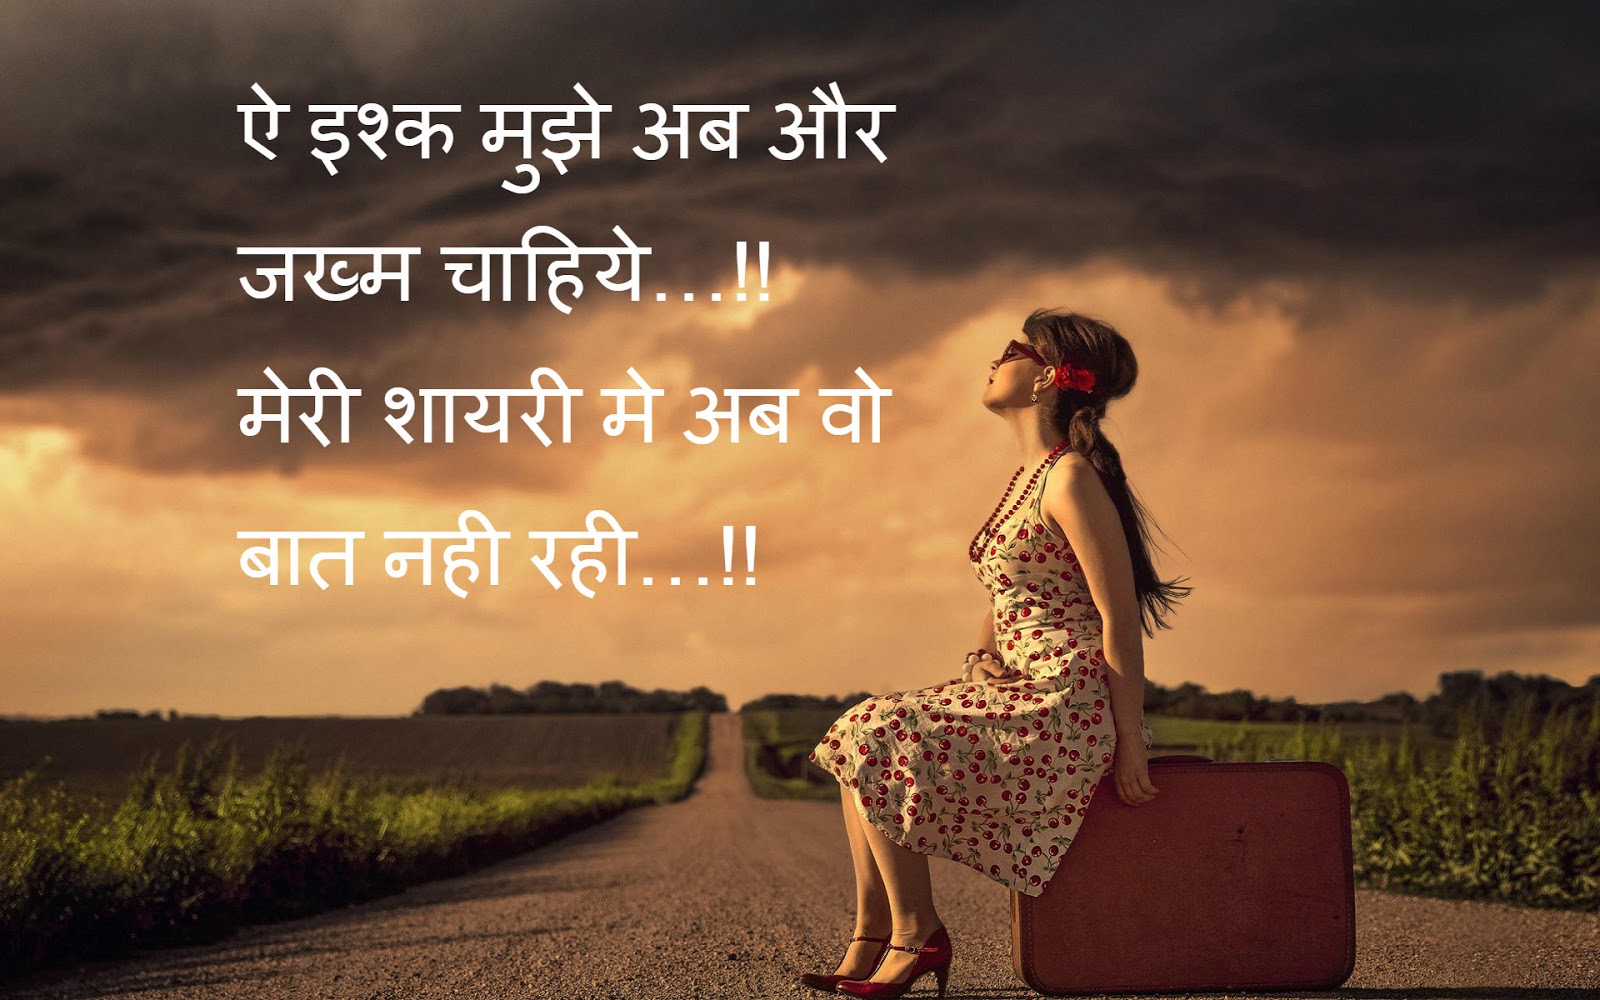 Hindi Shayari images wallpapers for Best & Latest Romantic Love Shayari Sms Messages in Hindi for Gf Bf with Lovely Pics